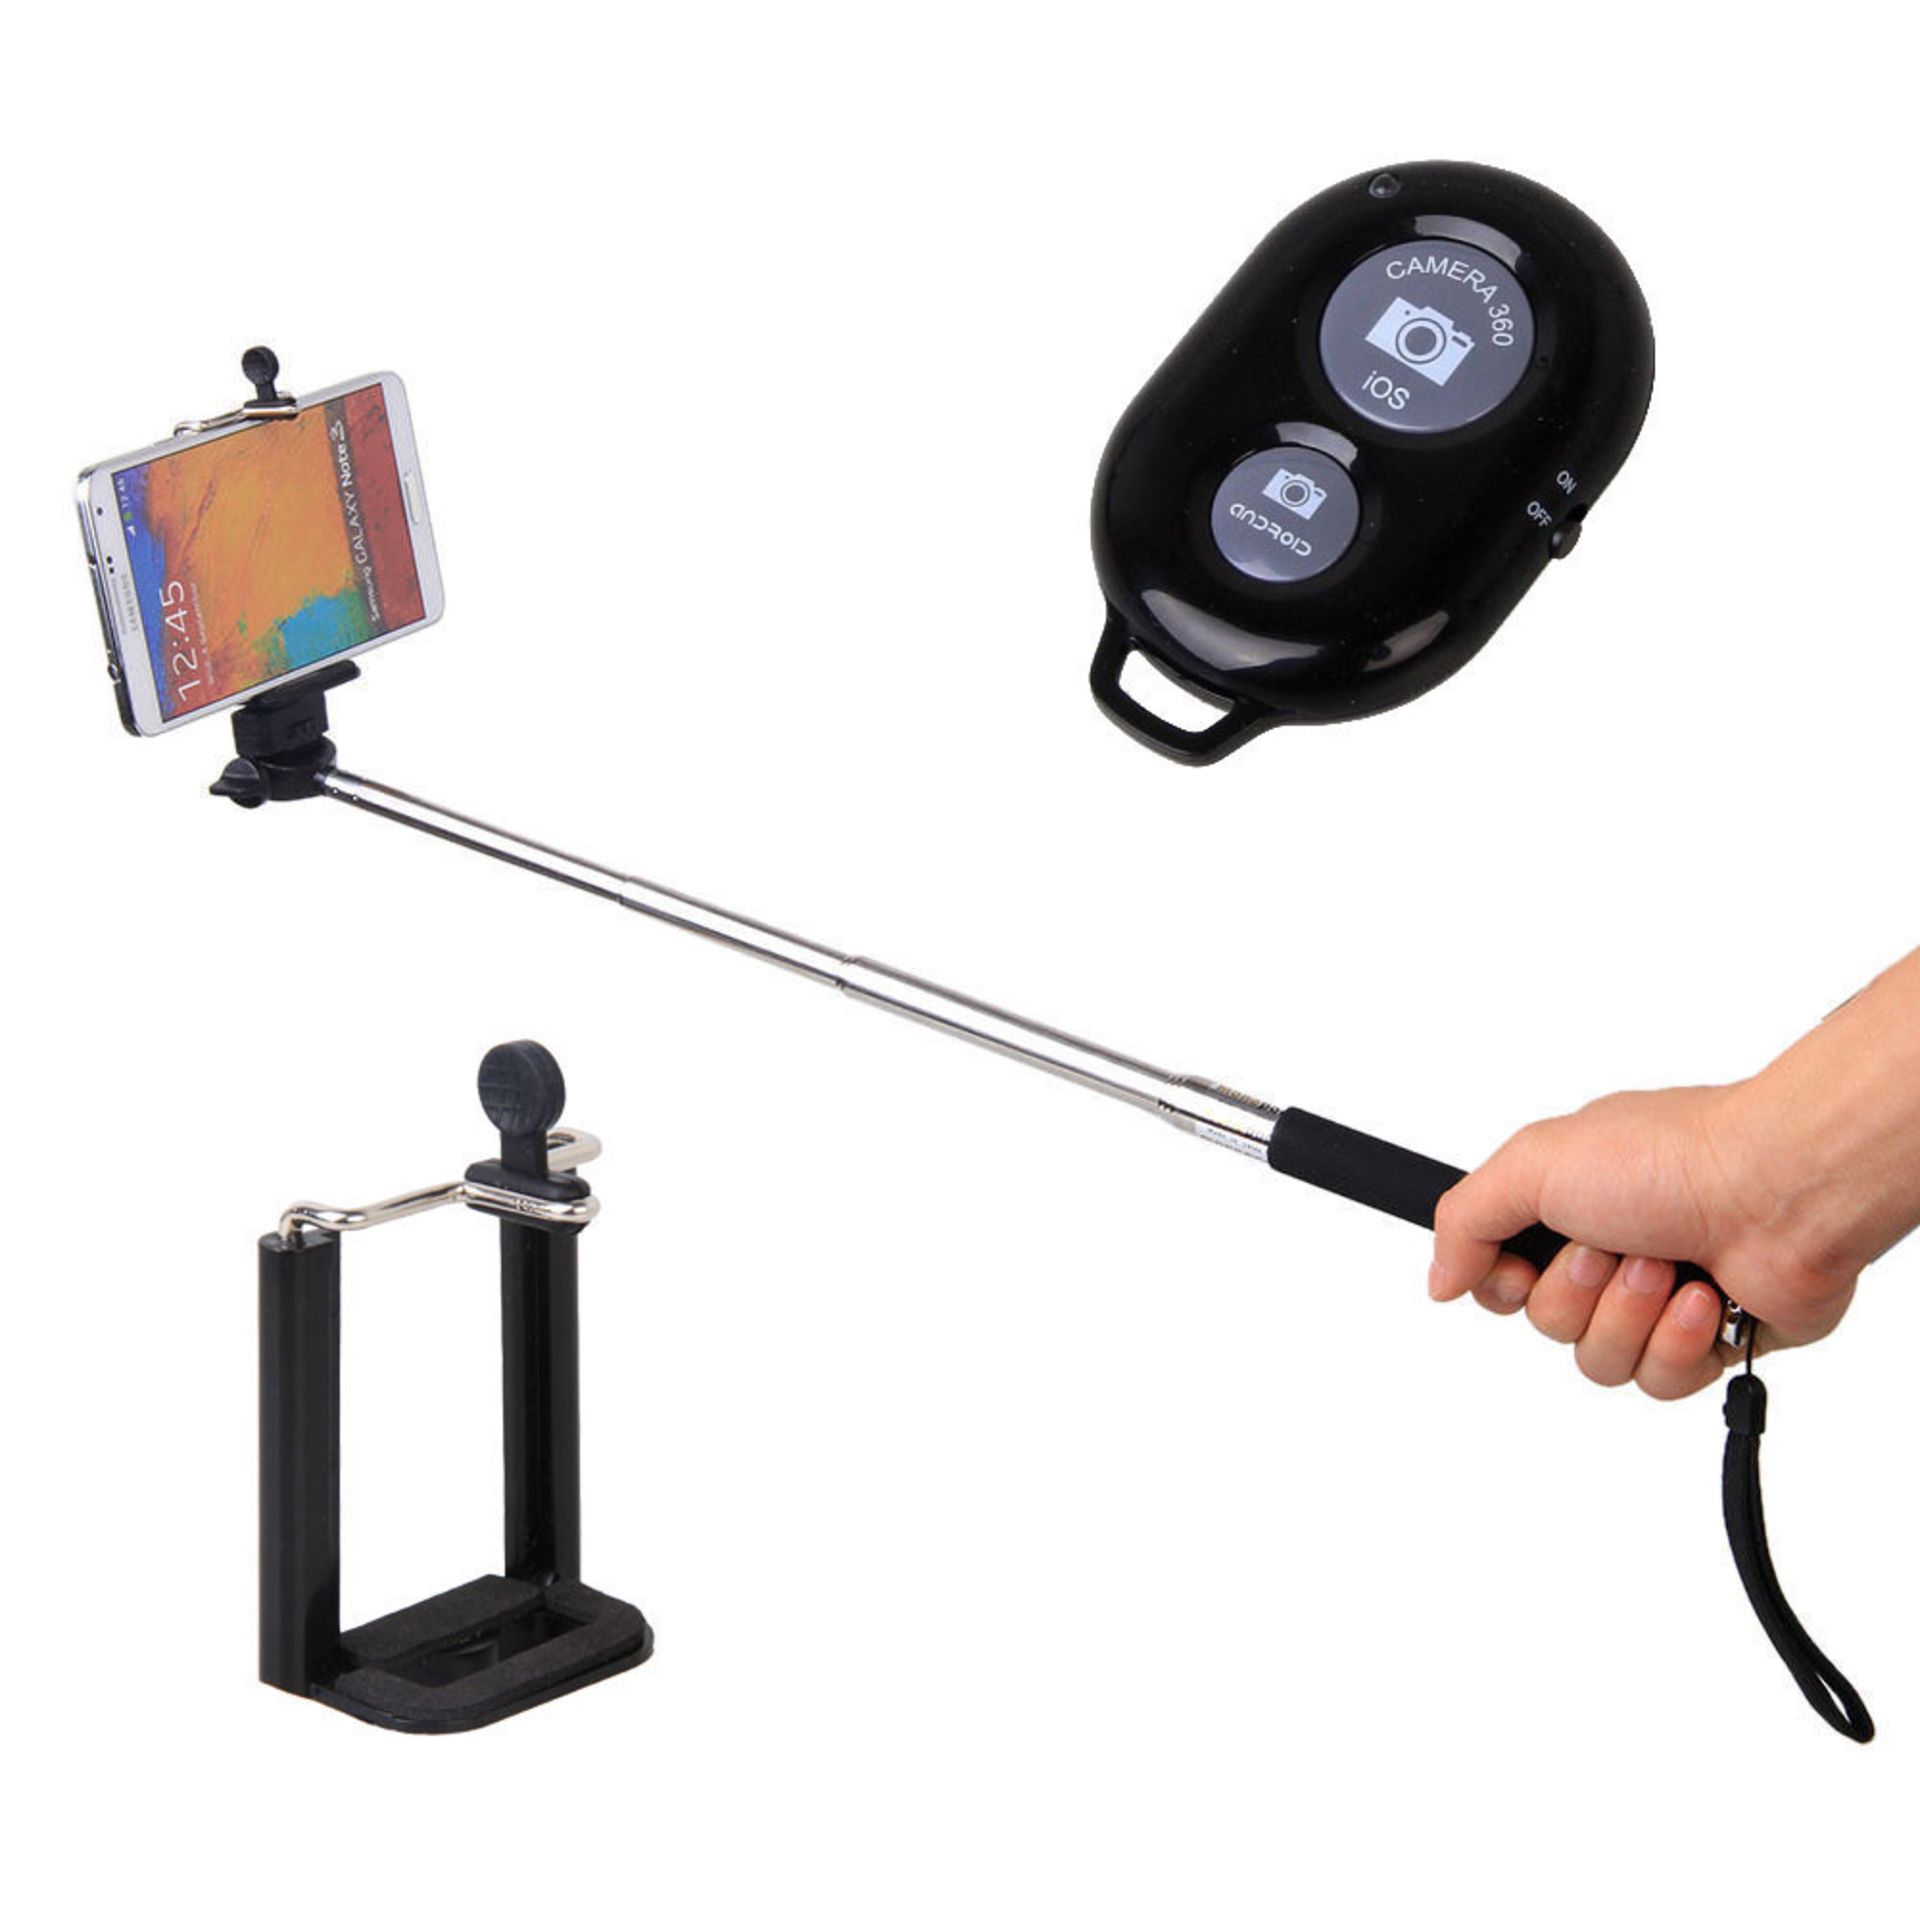 V Brand New Selfie Stick with Bluetooth Remote Control - RRP £19.09 X 2 Bid price to be multiplied